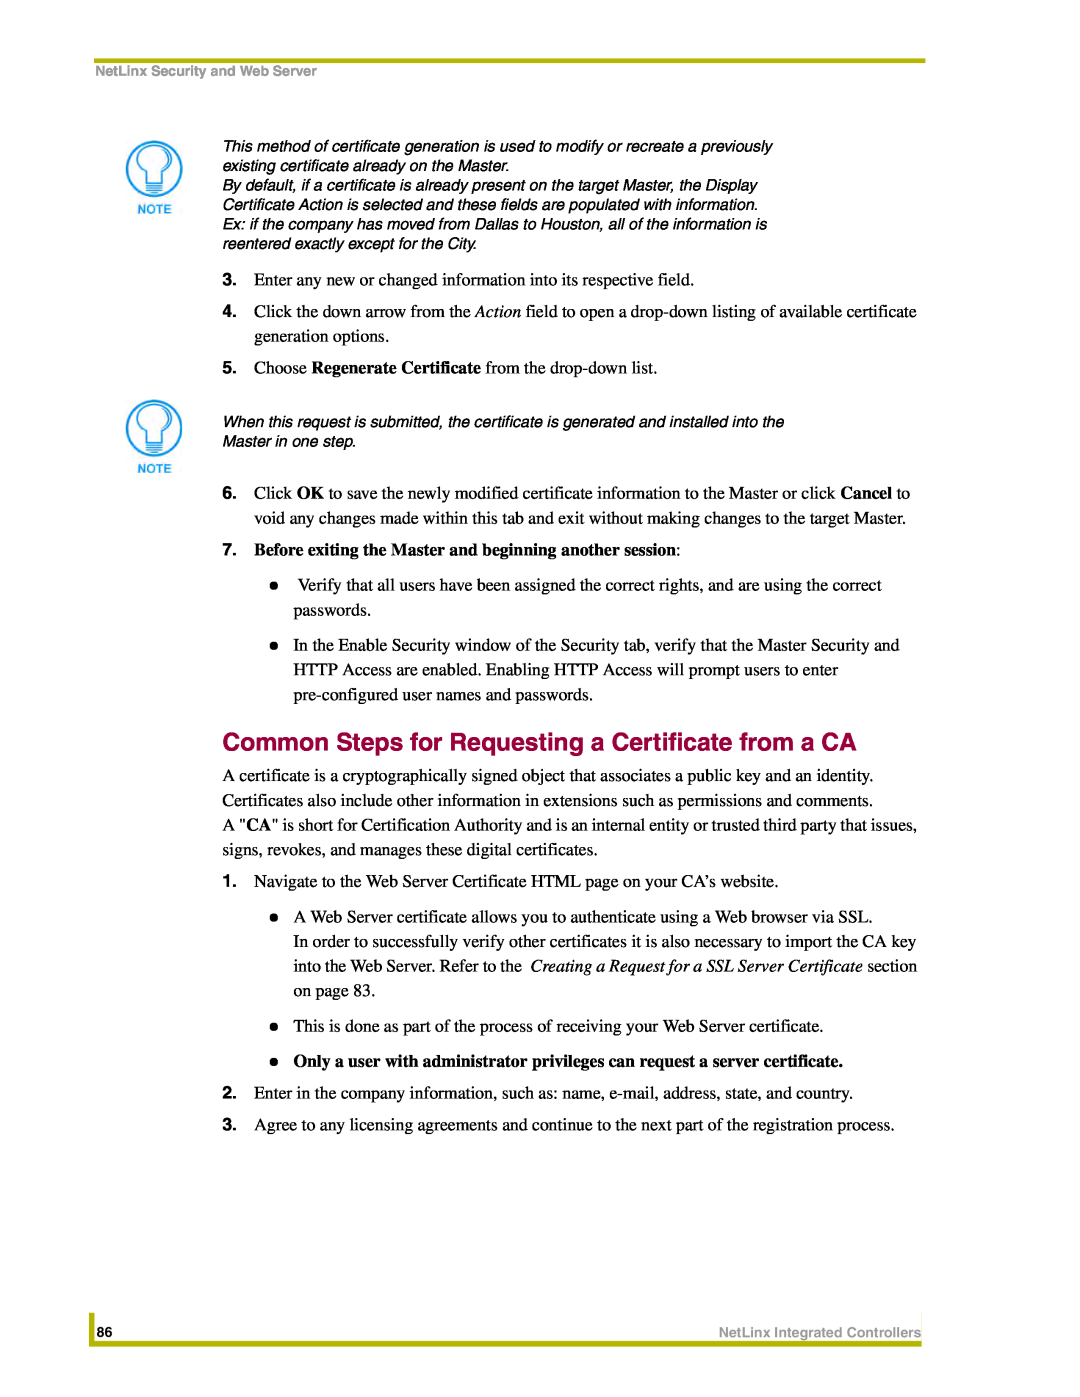 AMX NI-2000 Common Steps for Requesting a Certificate from a CA, Before exiting the Master and beginning another session 